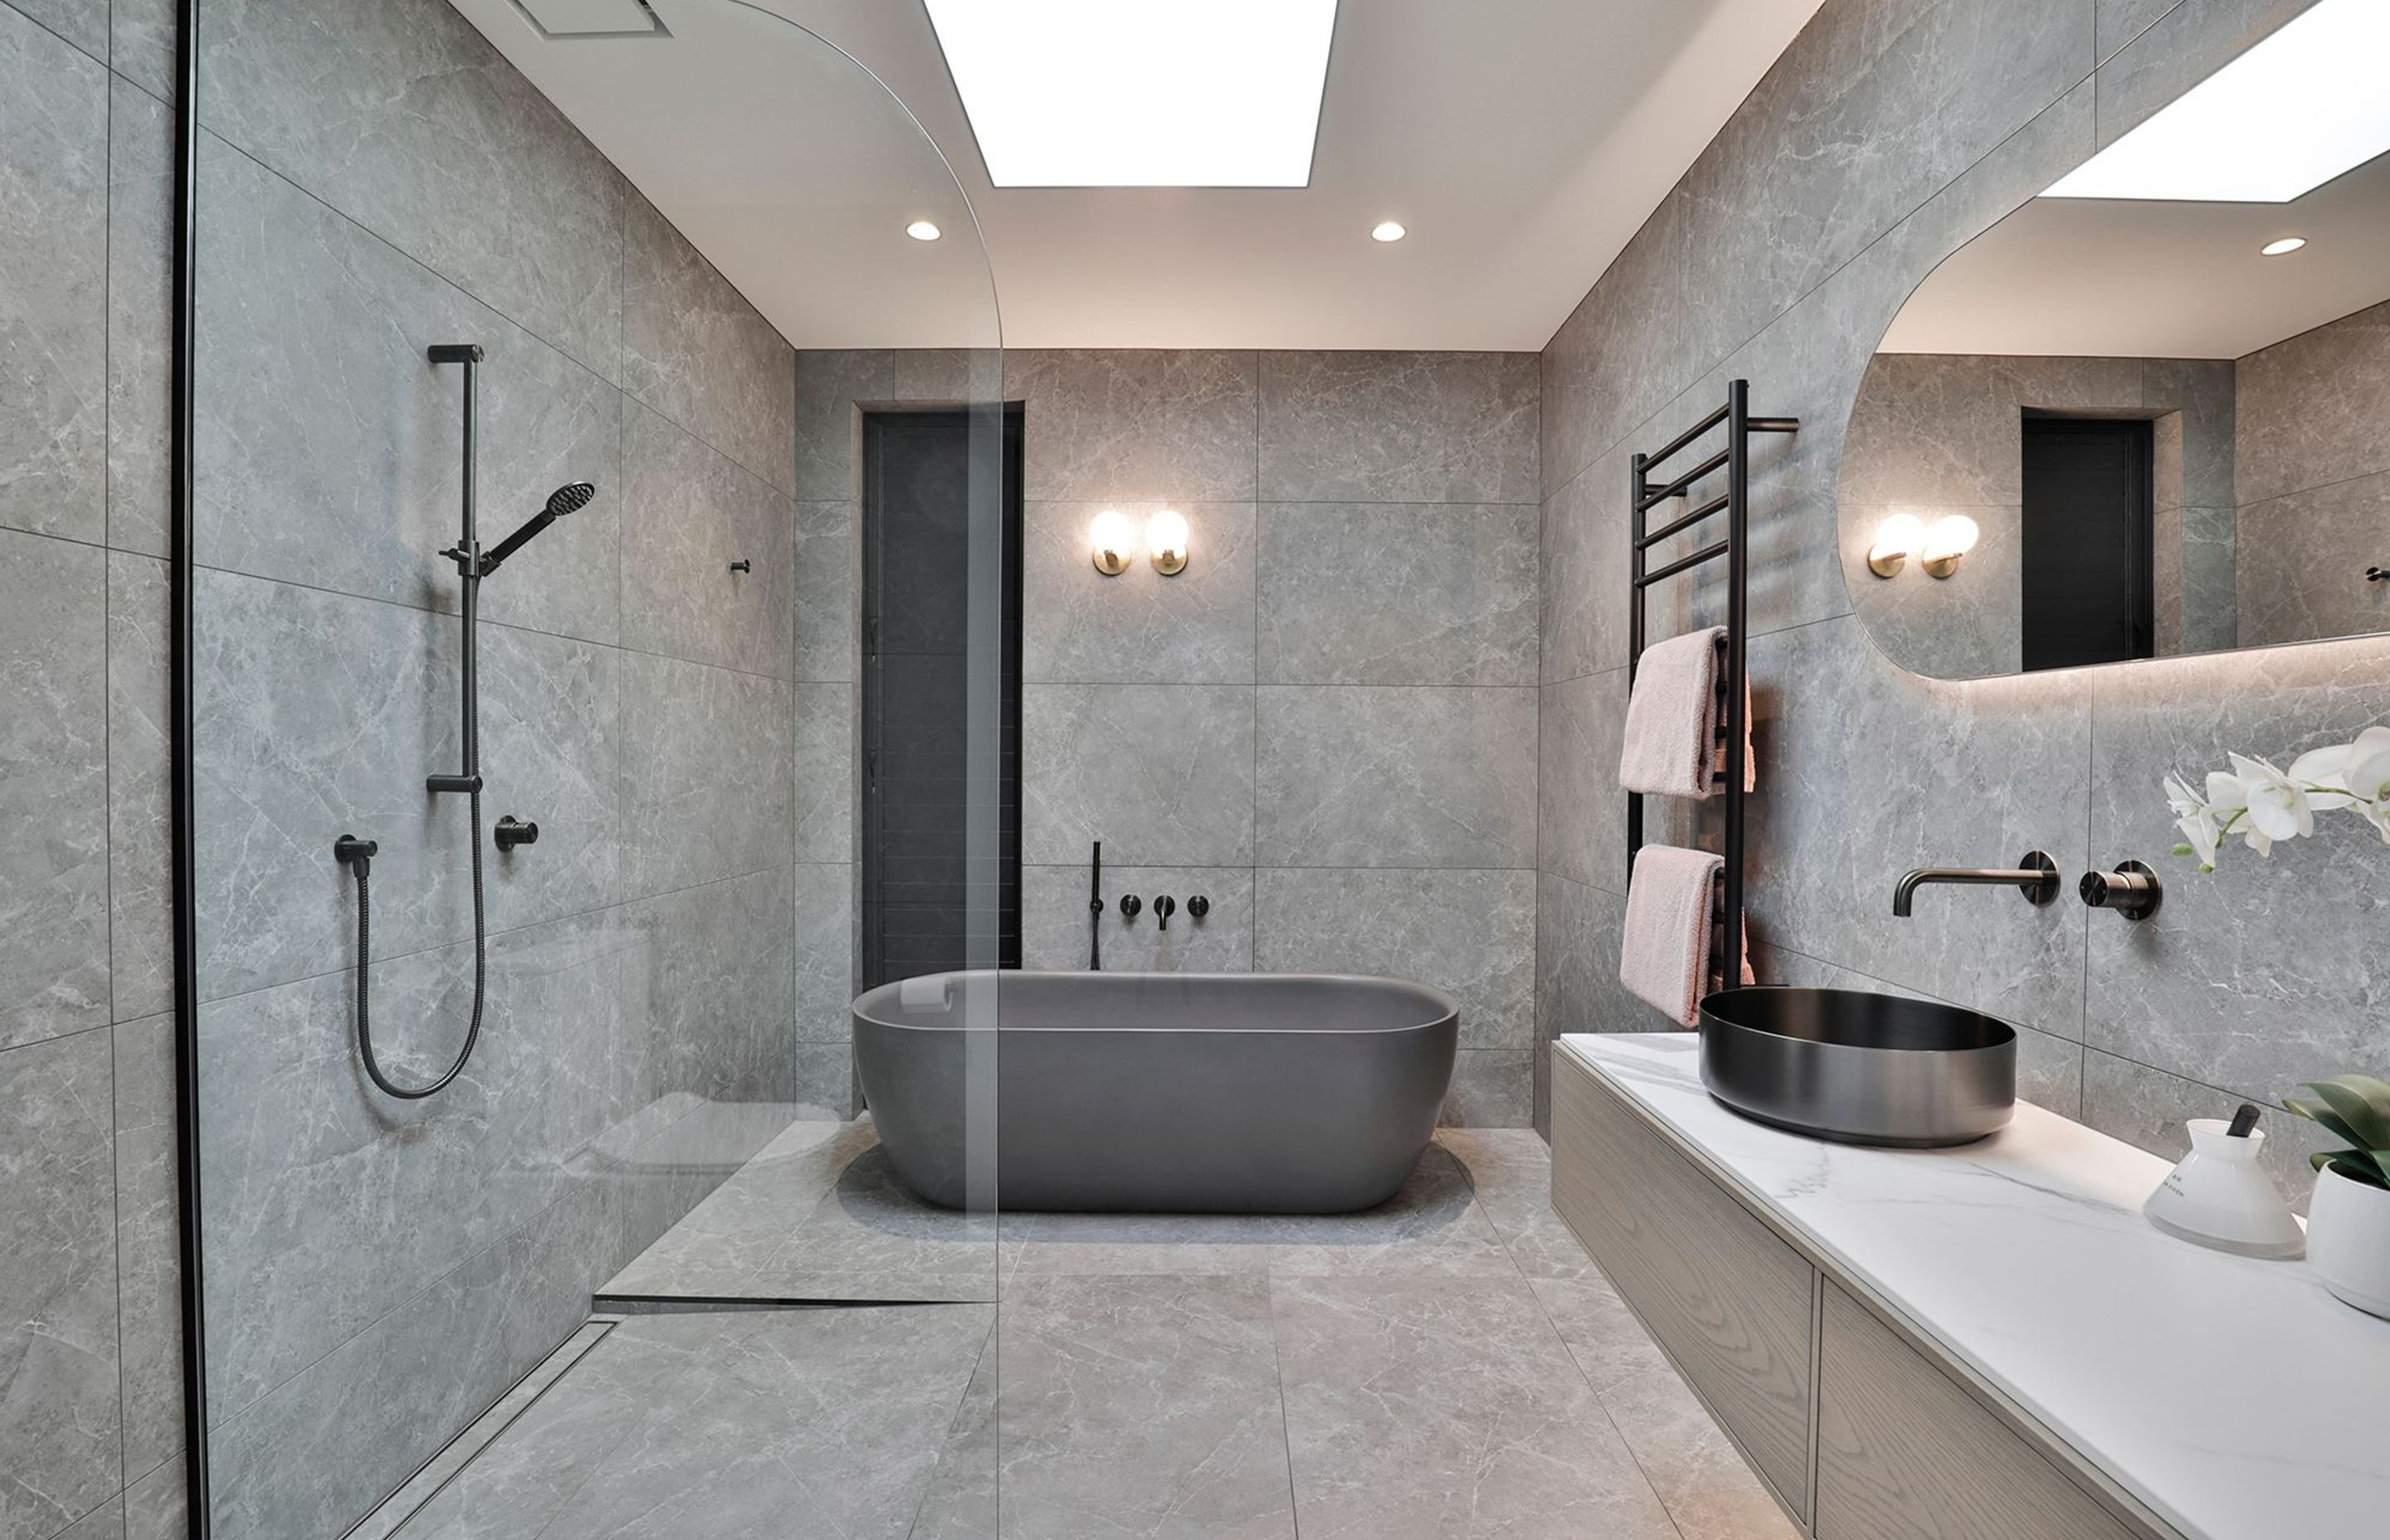 Design by Cube Dentro. Tile: Trilogy Sandy Grey Soft 600x1200mm. Stocked in 595x595mm.